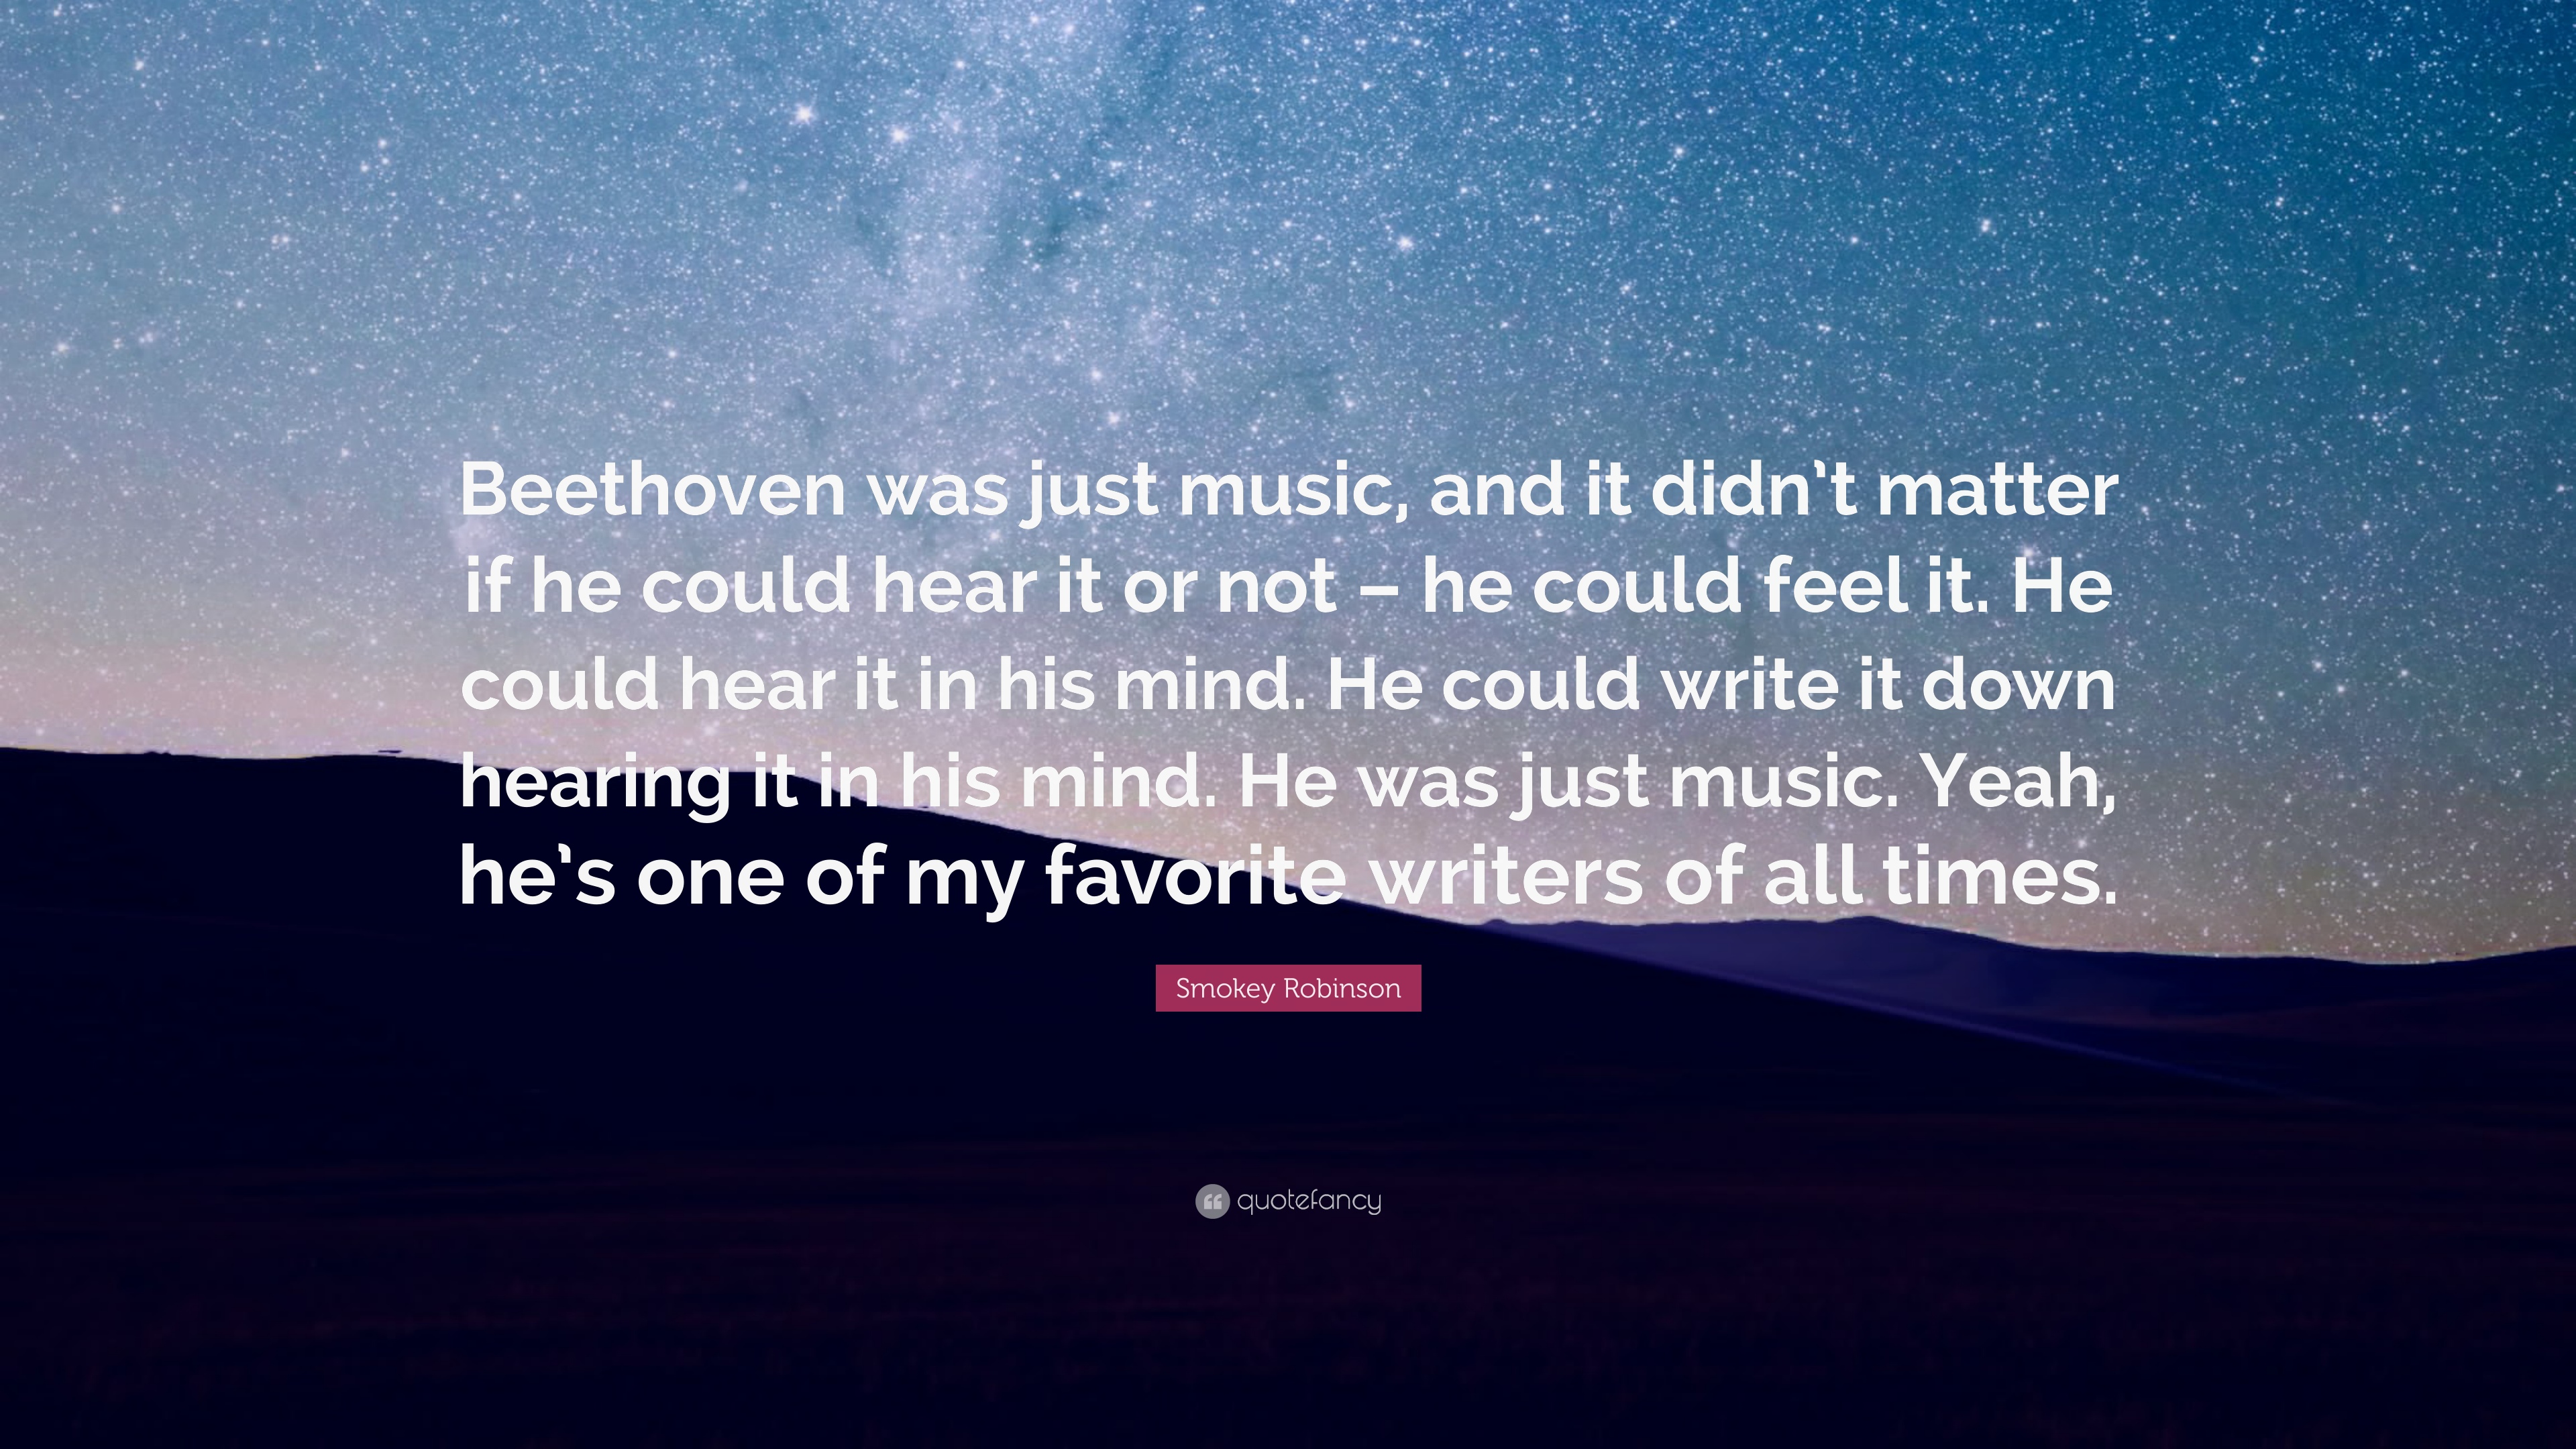 Smokey Robinson Quote: “Beethoven was just music, and it didn't